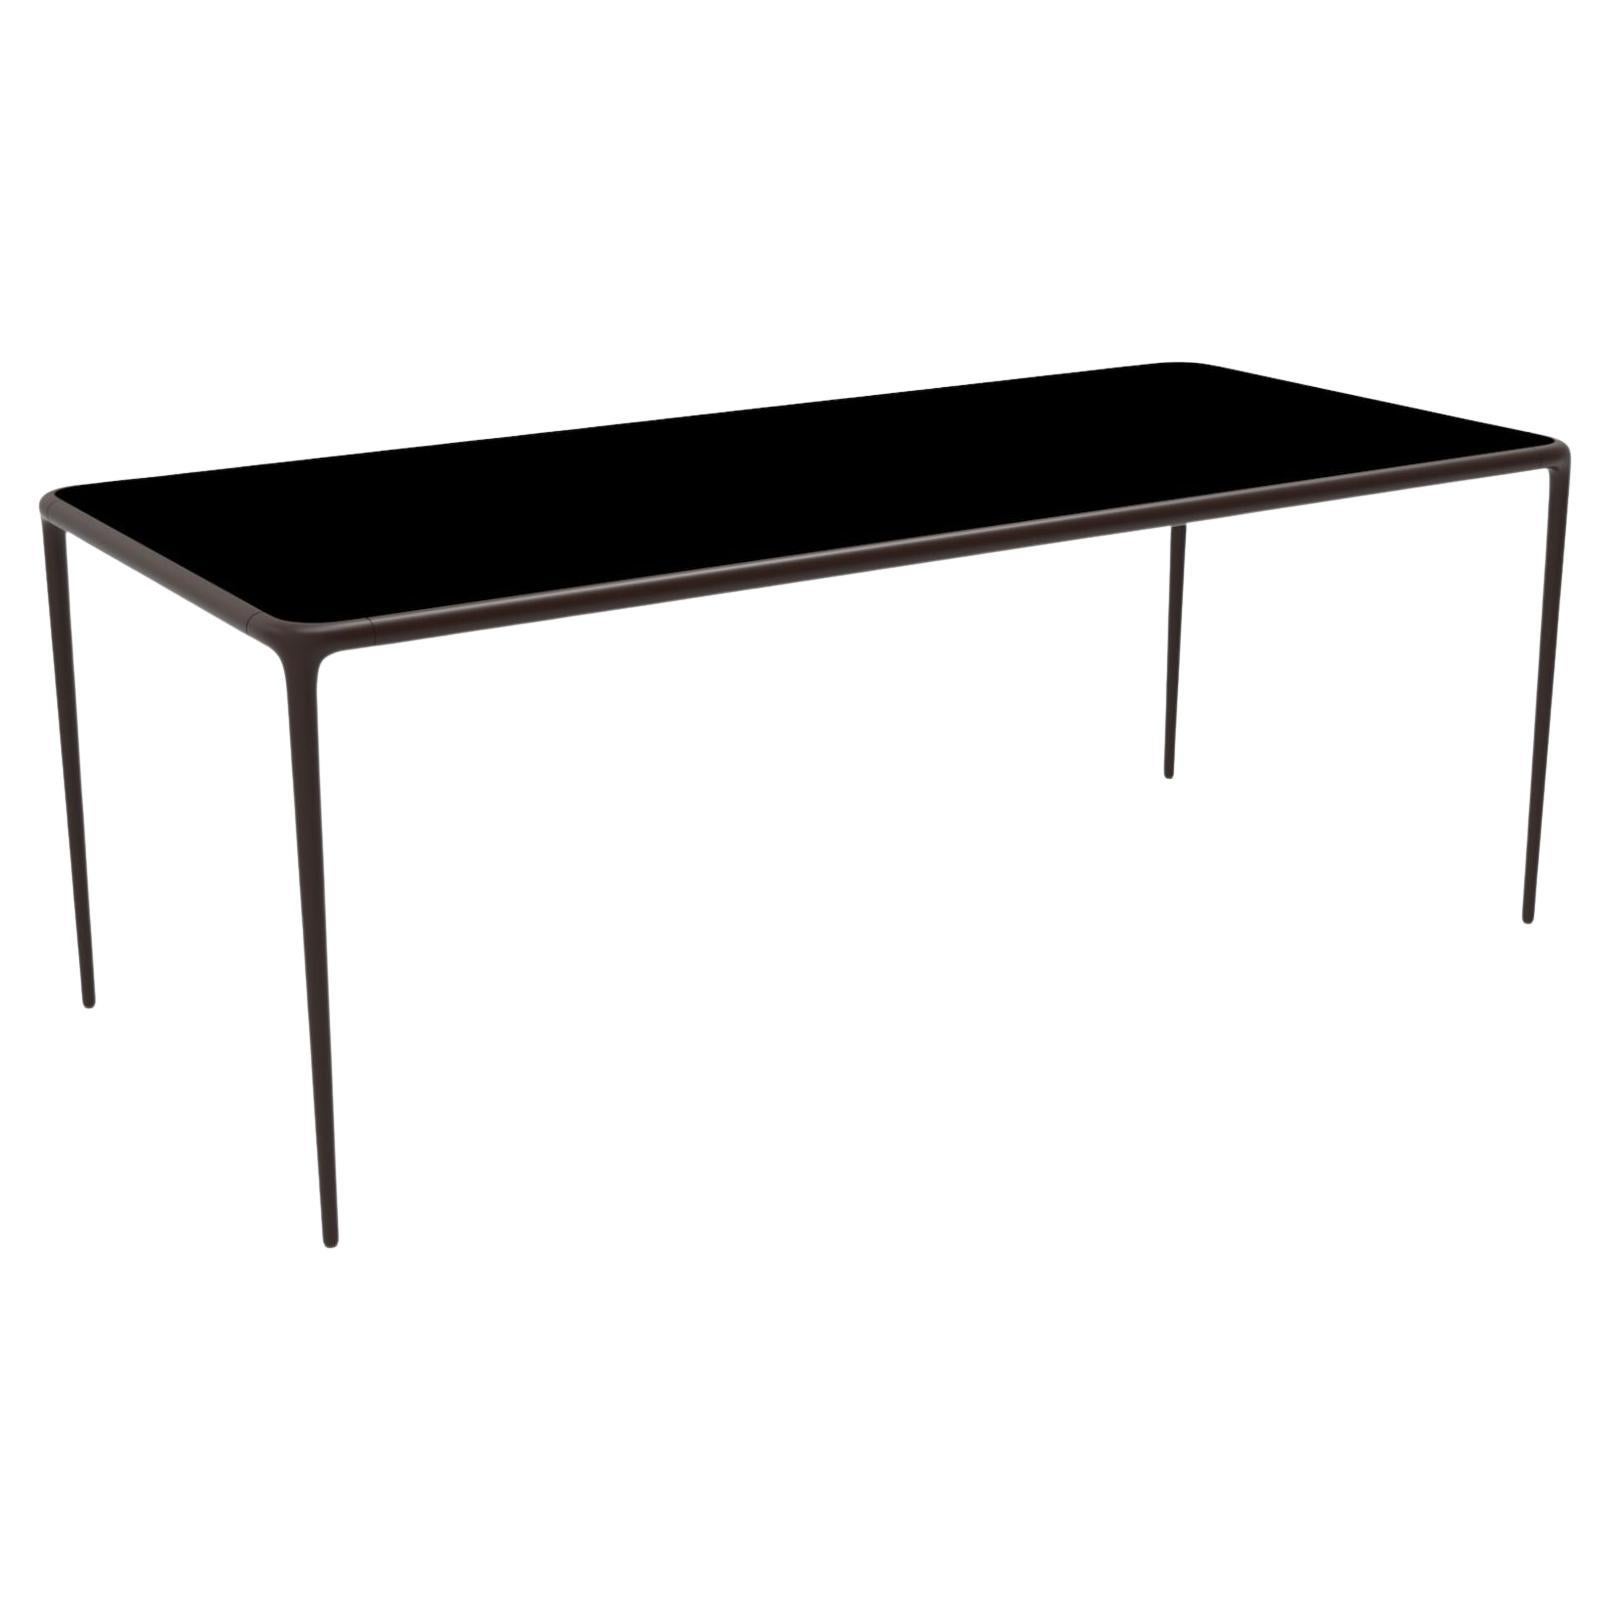 Xaloc Chocolate Glass Top Table 200 by Mowee For Sale